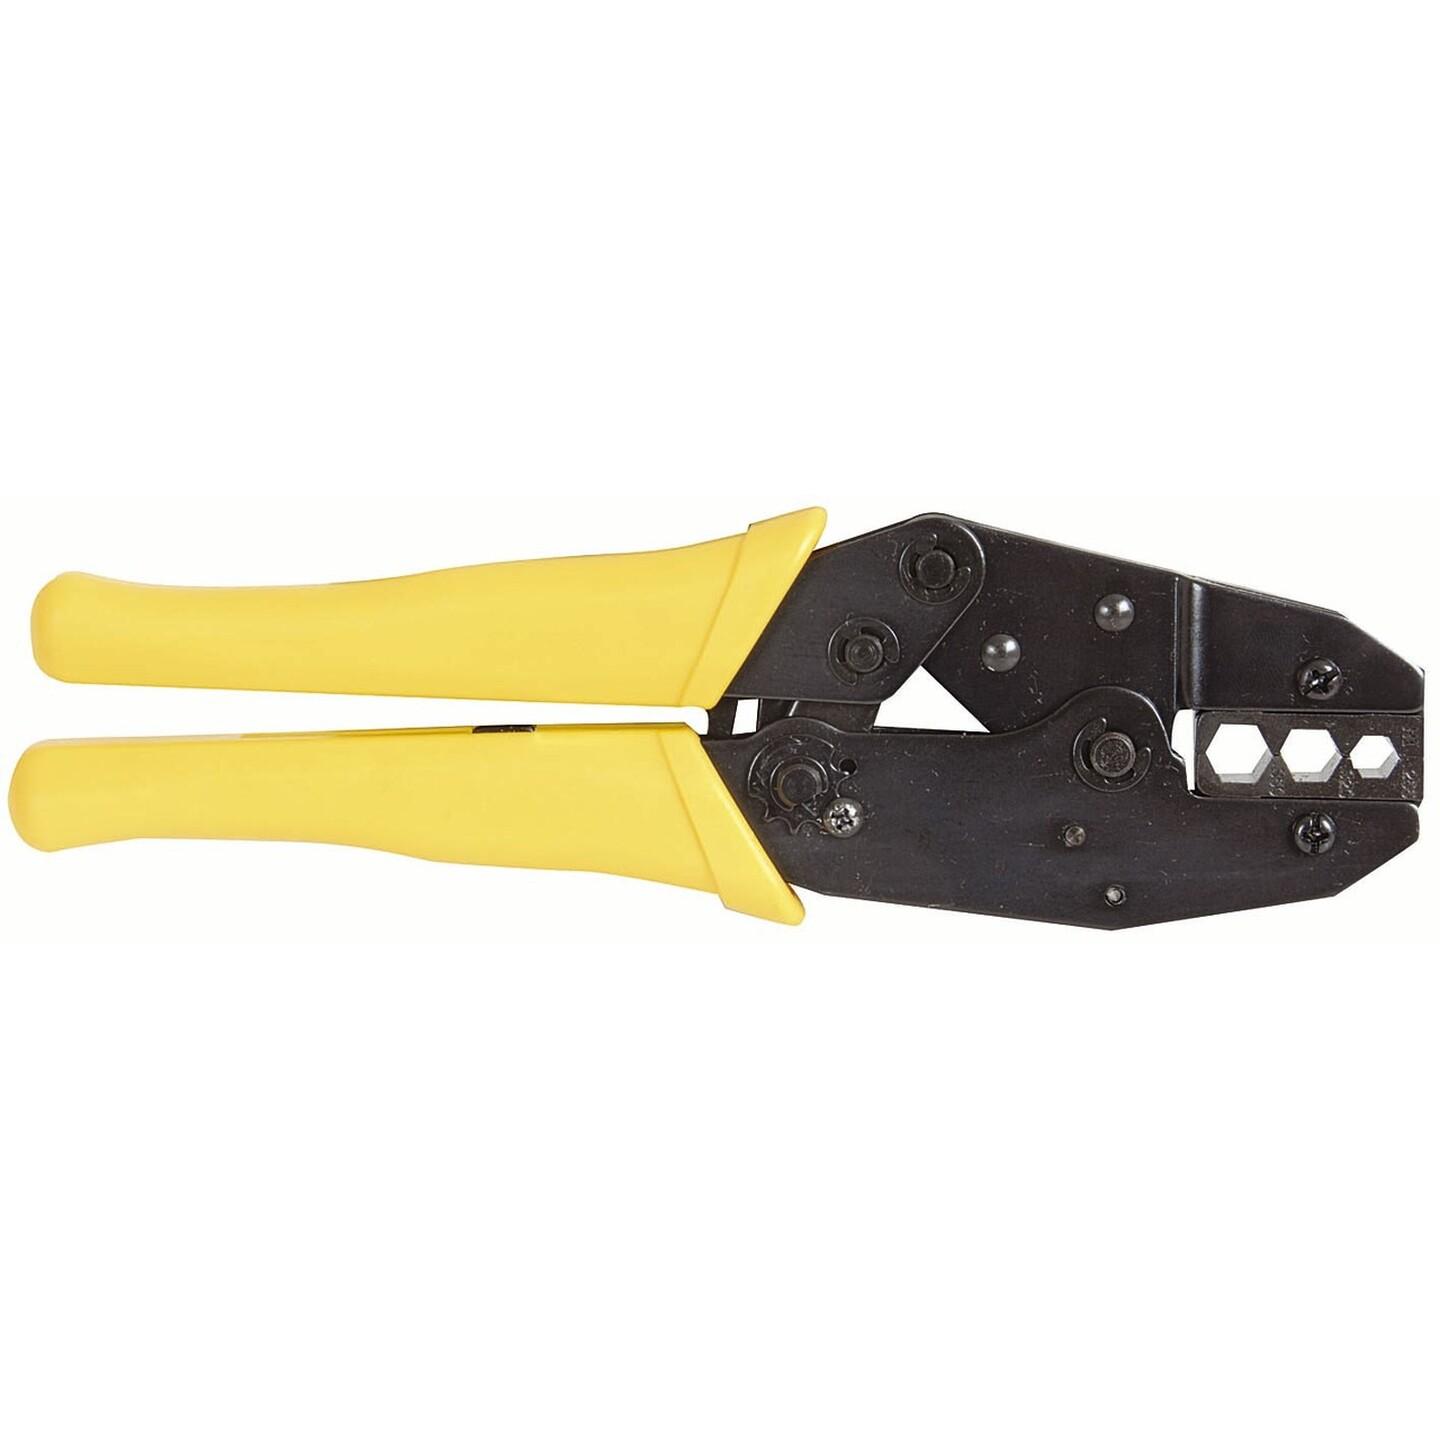 Ratchet Crimping Tool for F-Type Connectors